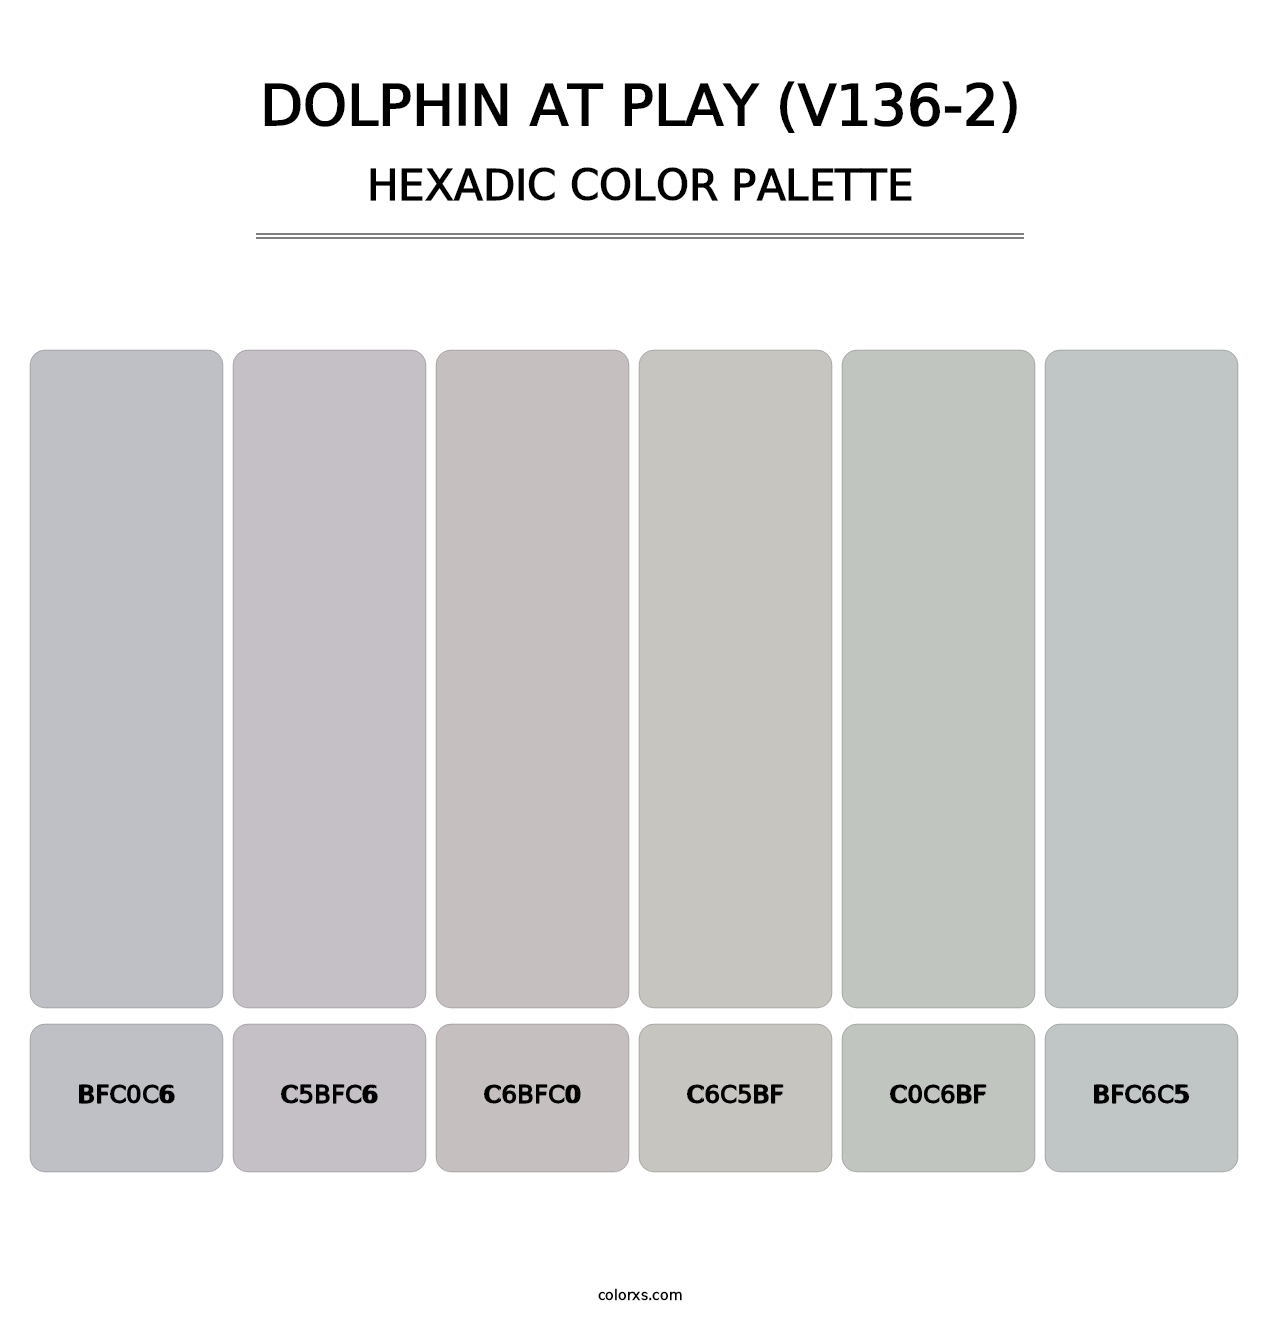 Dolphin at Play (V136-2) - Hexadic Color Palette